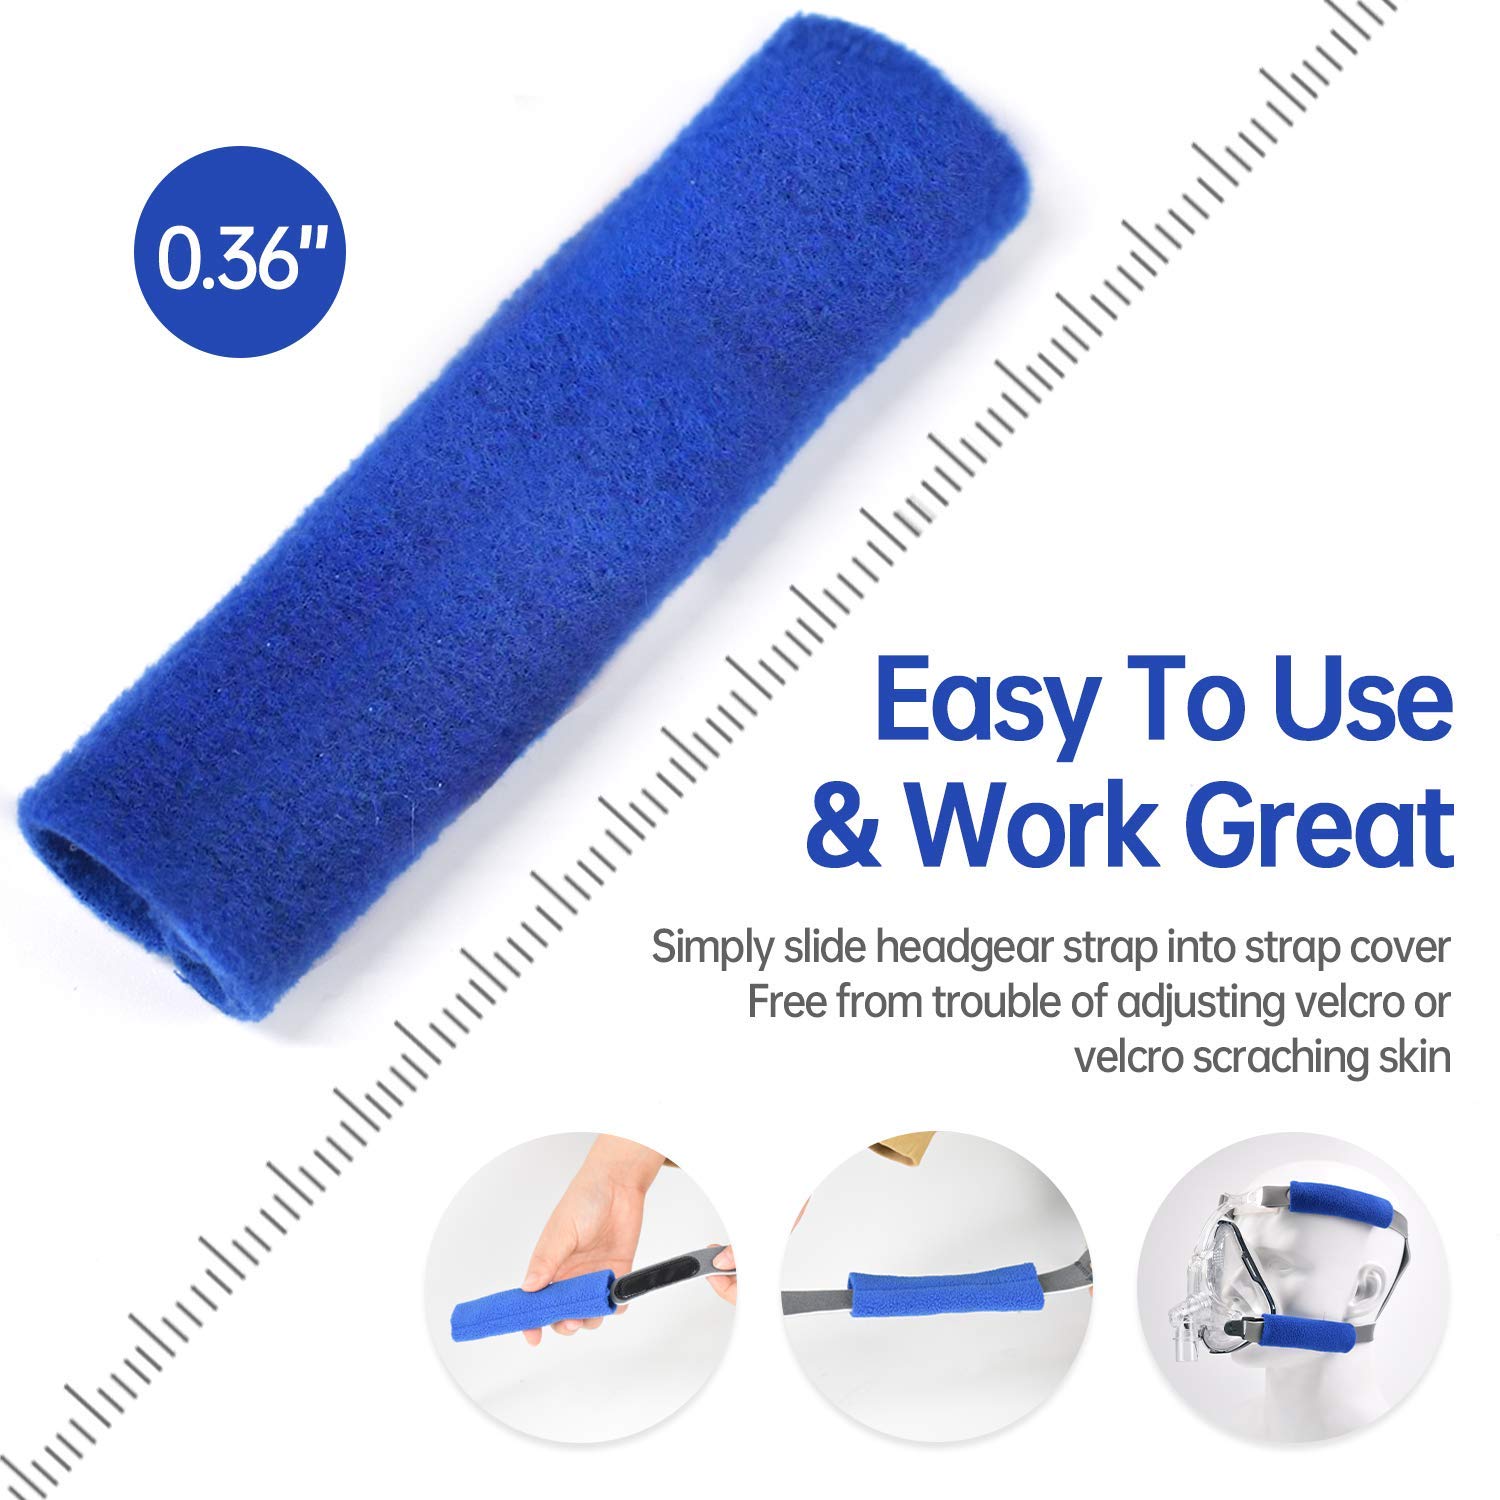 CPAP Headgear Strap Covers for Resmed Forcpap For better sleep - Your  Reliable CPAP Supplier